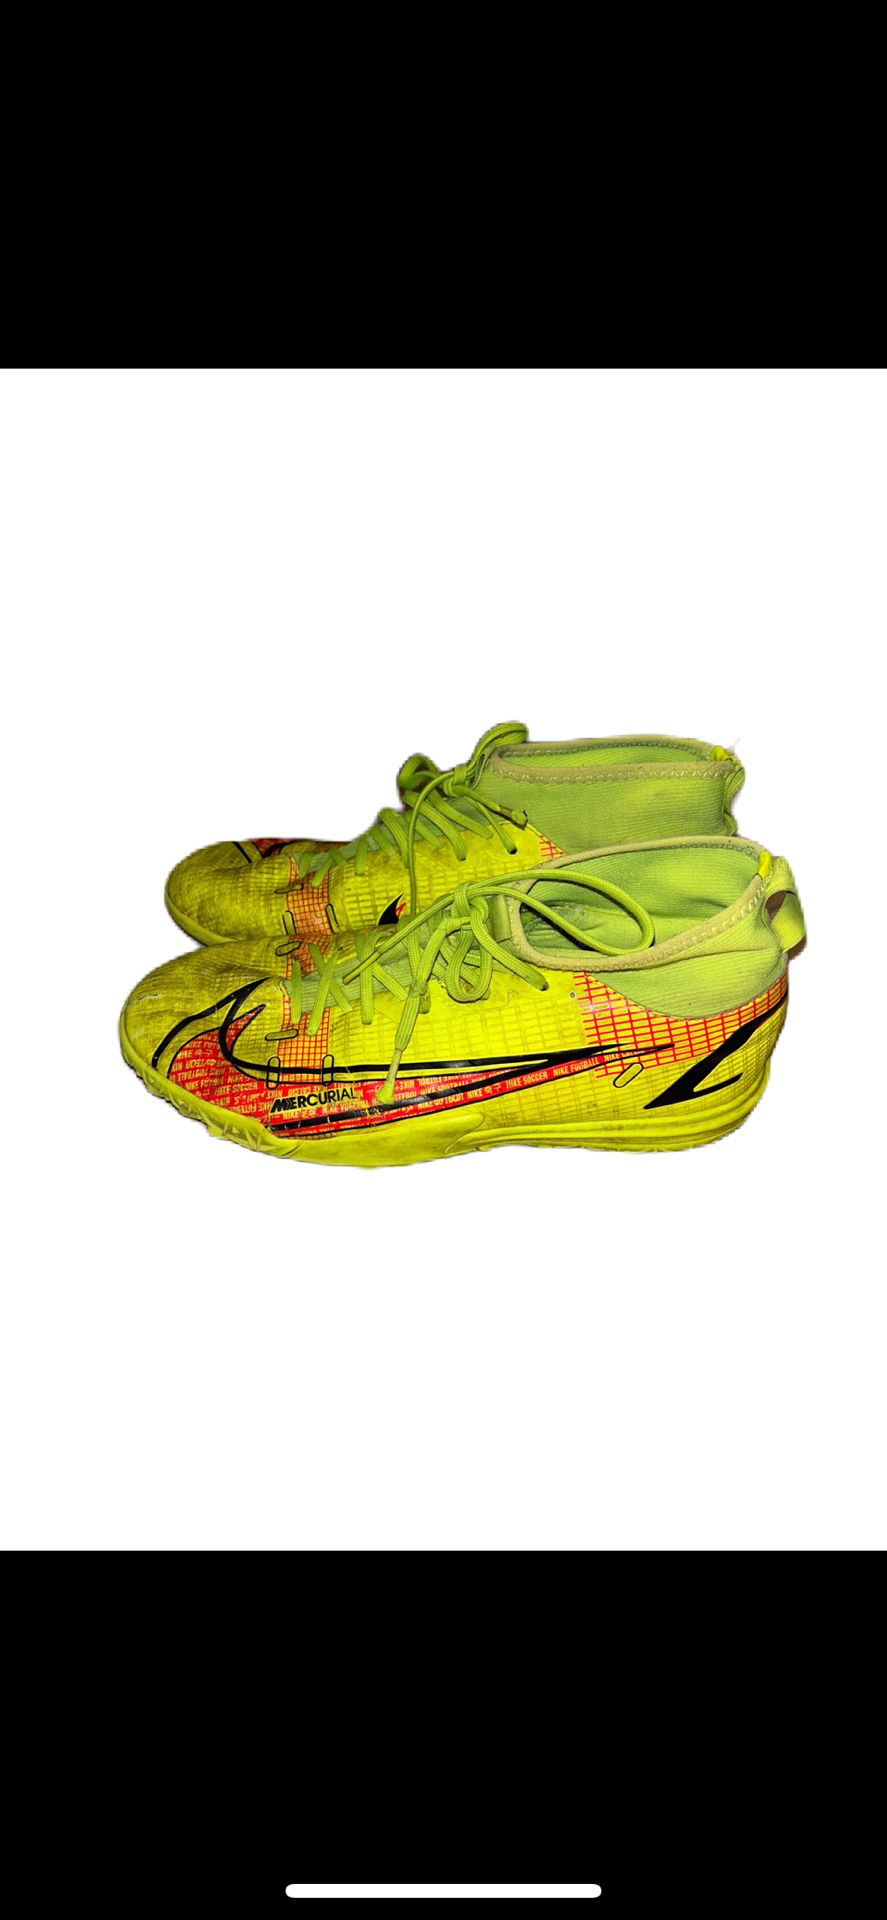 Nike Superfly Indoor Soccer Turf Shoes (Used) 